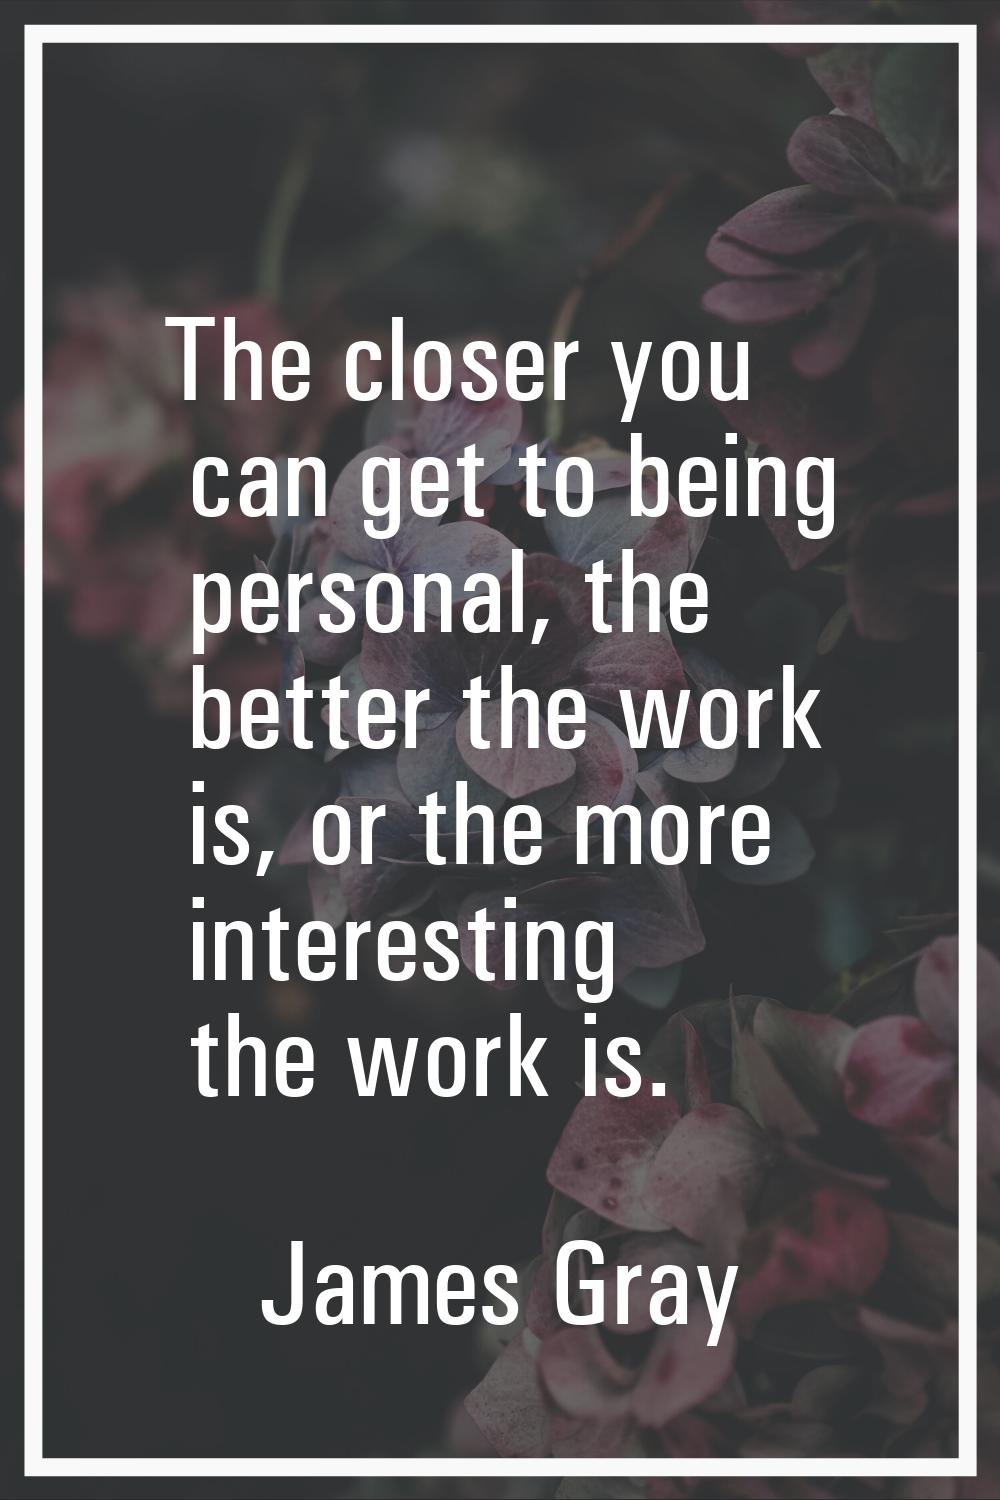 The closer you can get to being personal, the better the work is, or the more interesting the work 